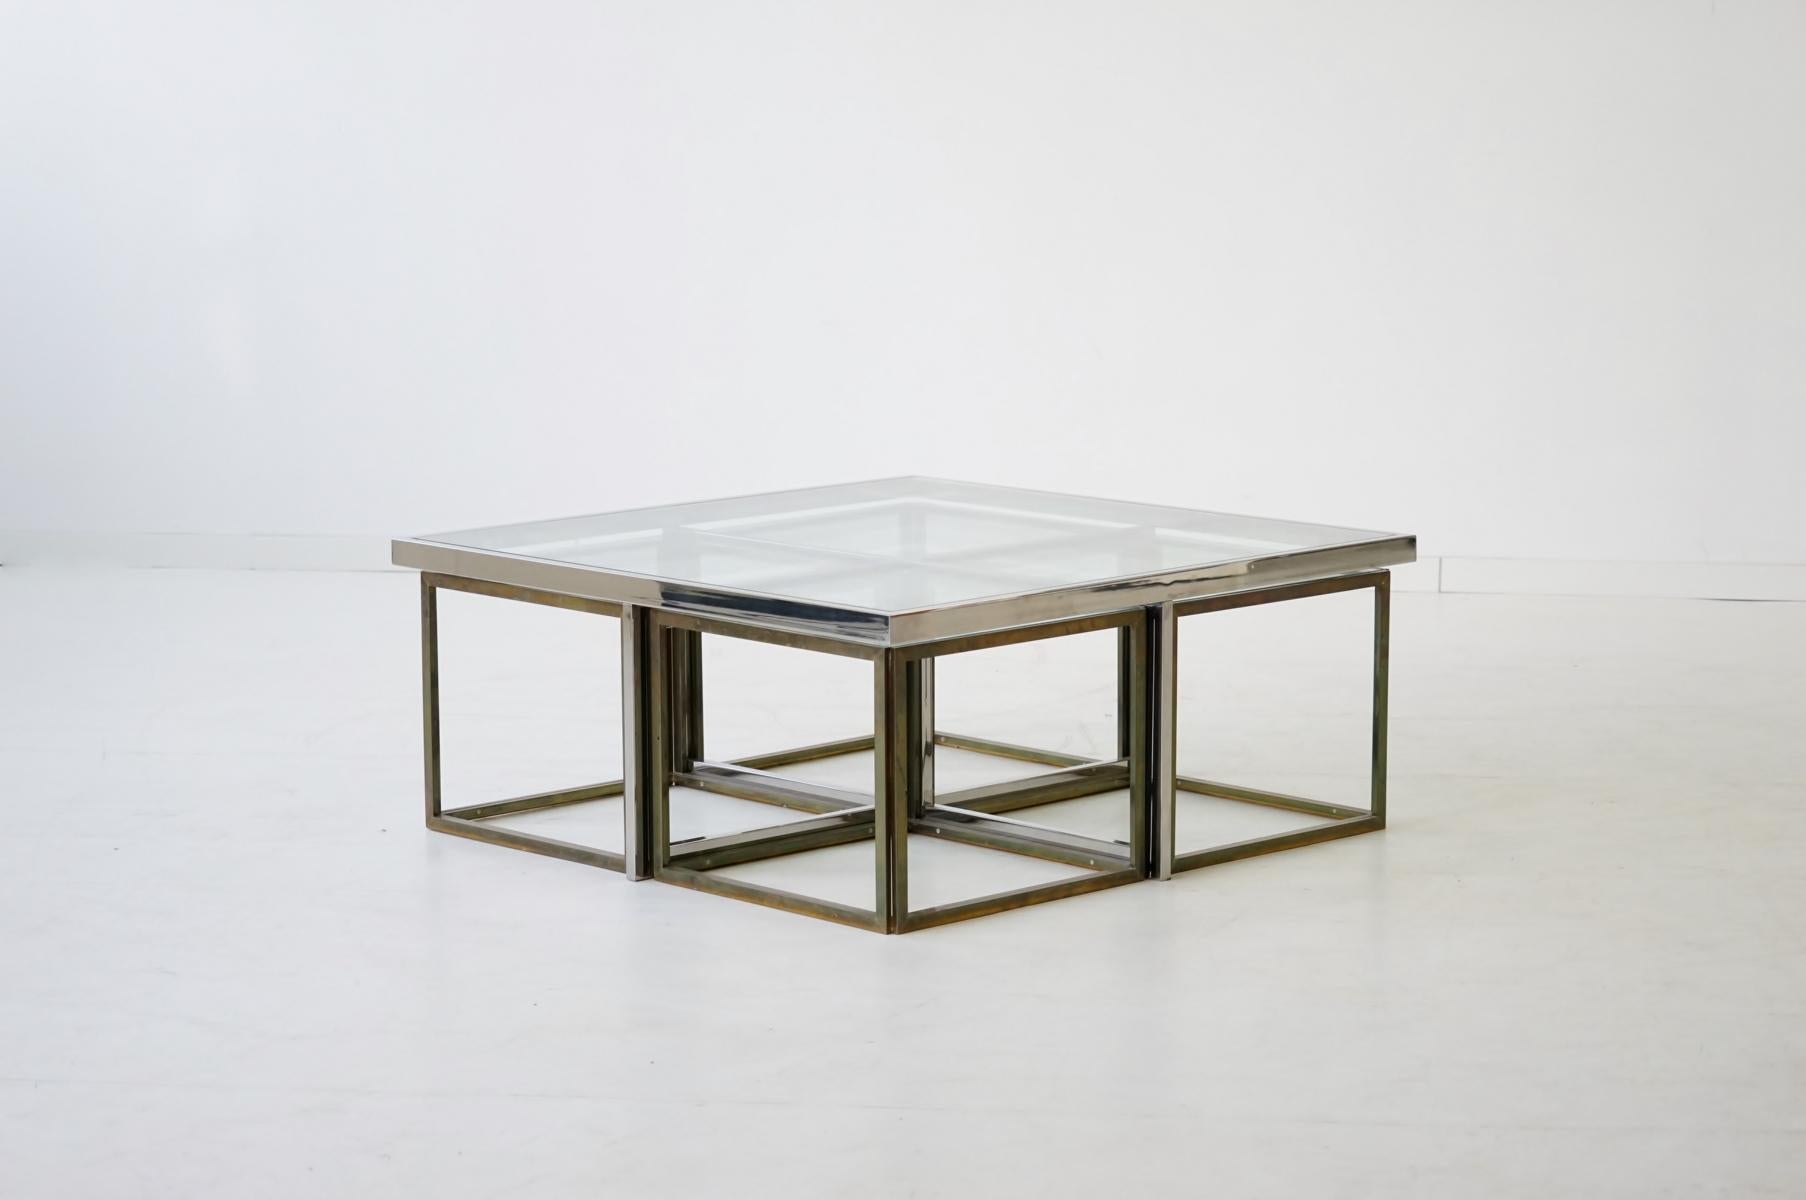 Maison Charles Brass Coffee Table with Four Nesting Tables, 1960s For Sale 6